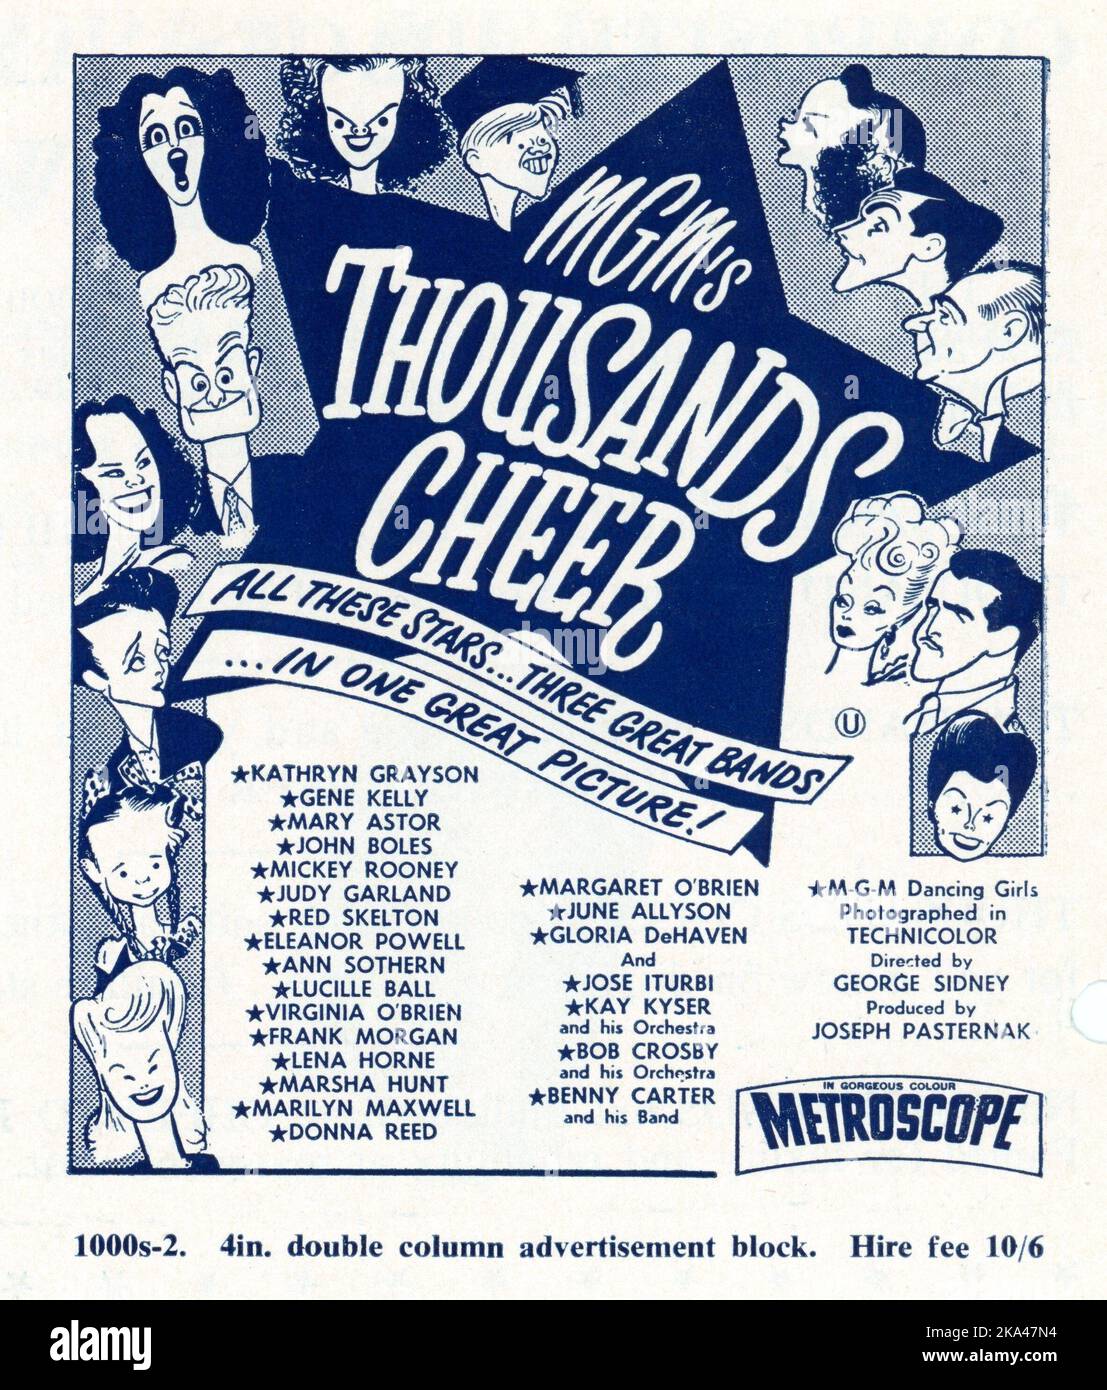 Ad Block with art by AL HIRSCHFELD from 1955 re-issue in Metroscope of (clockwise) MARILYN MAXWELL, MARGARET O'BRIEN, MARY ASTOR, ELEANOR POWELL, RED SKELTON, VIRGINIA O'BRIEN, JUDY GARLAND, MICKEY ROONEY, KATHRYN GRAYSON, GENE KELLY, JOSE ITURBI, LUCILLE BALL, JOHN BOLES and LENA HORNE in THOUSANDS CHEER 1943 director GEORGE SIDNEY story / screenplay Paul Jarrico and Richard Collins producer Joe Pasternak Stock Photo